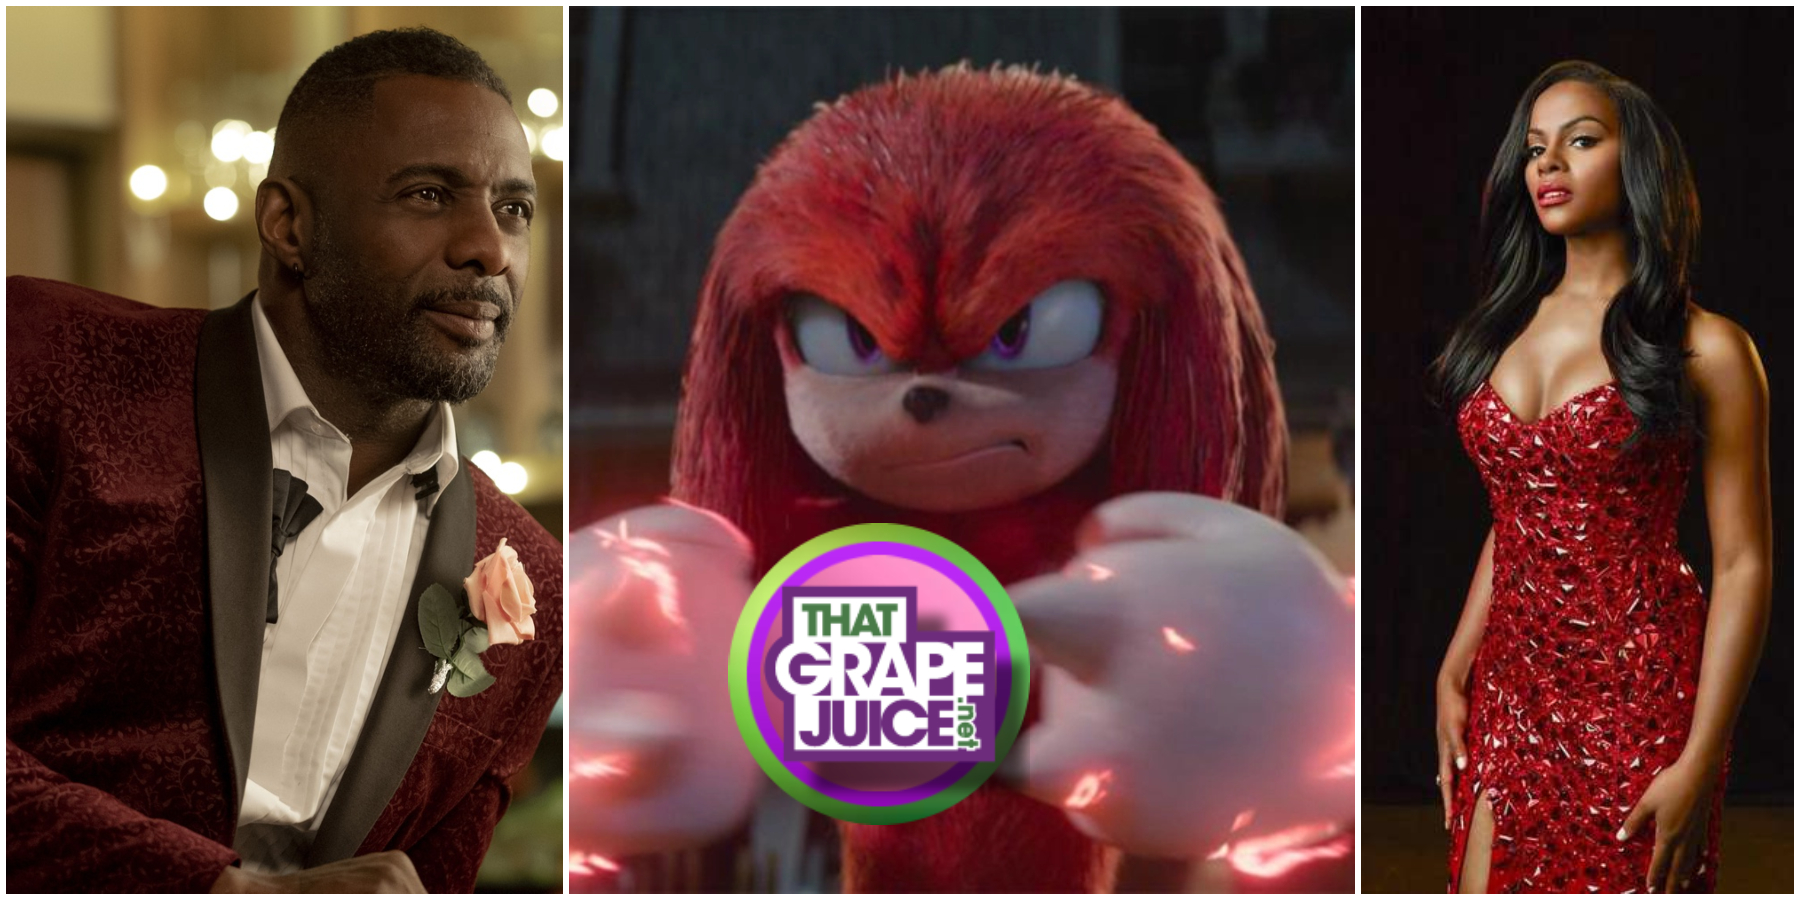 ‘Knuckles’: Idris Elba, Tika Sumpter To Lead ‘Sonic the Hedgehog’ Spinoff Series at Paramount+